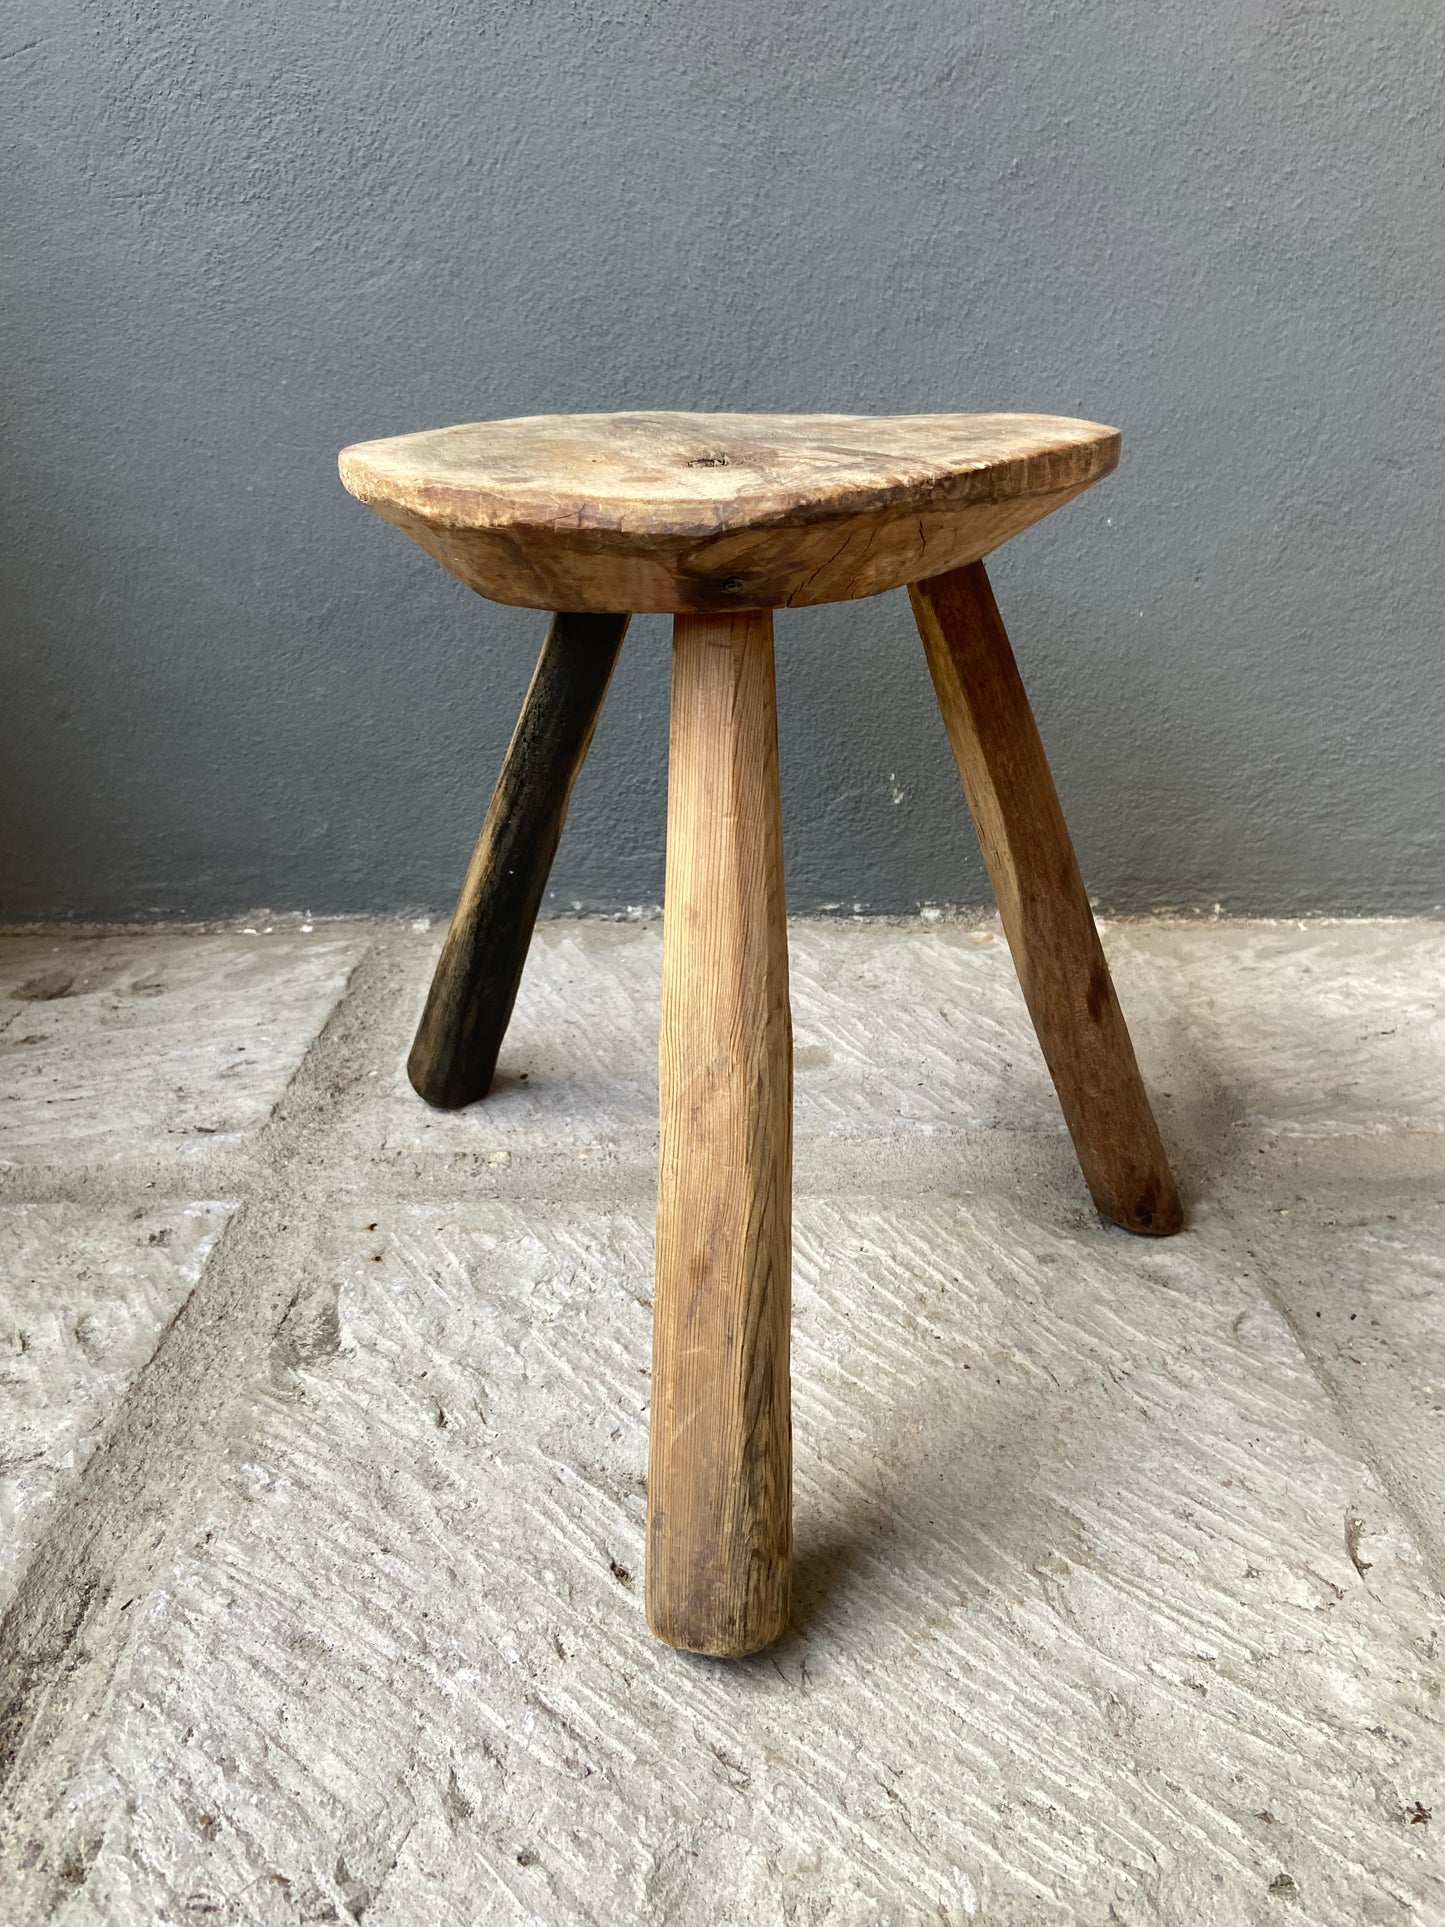 Mesquite Stool from Mexico